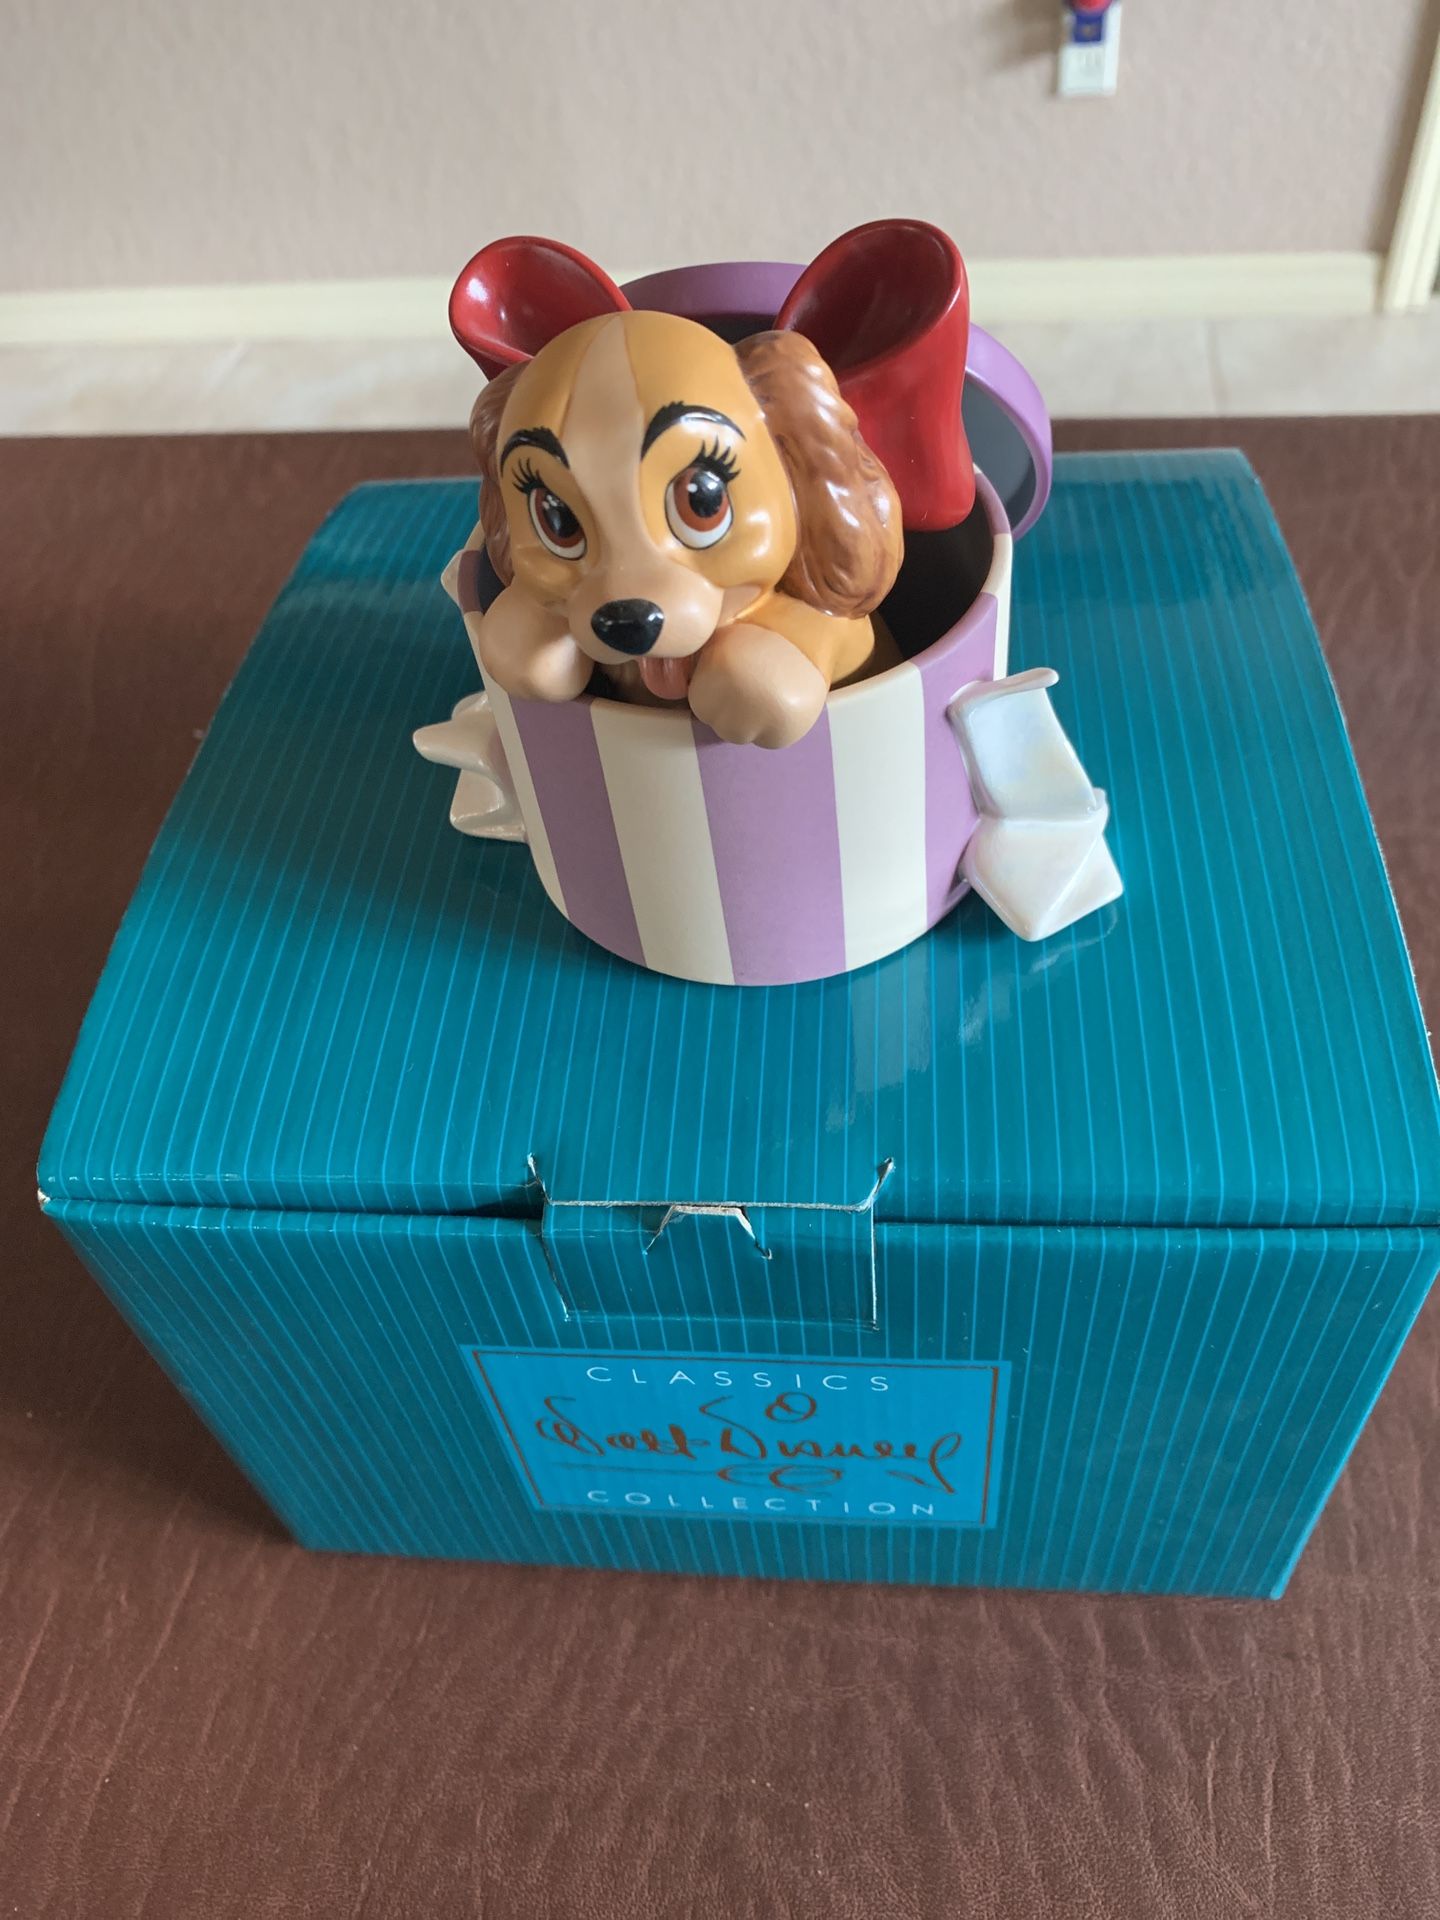 WDCC Disney "A PERFECTLY BEAUTIFUL LITTLE LADY" Lady and the Tramp - Box & COA